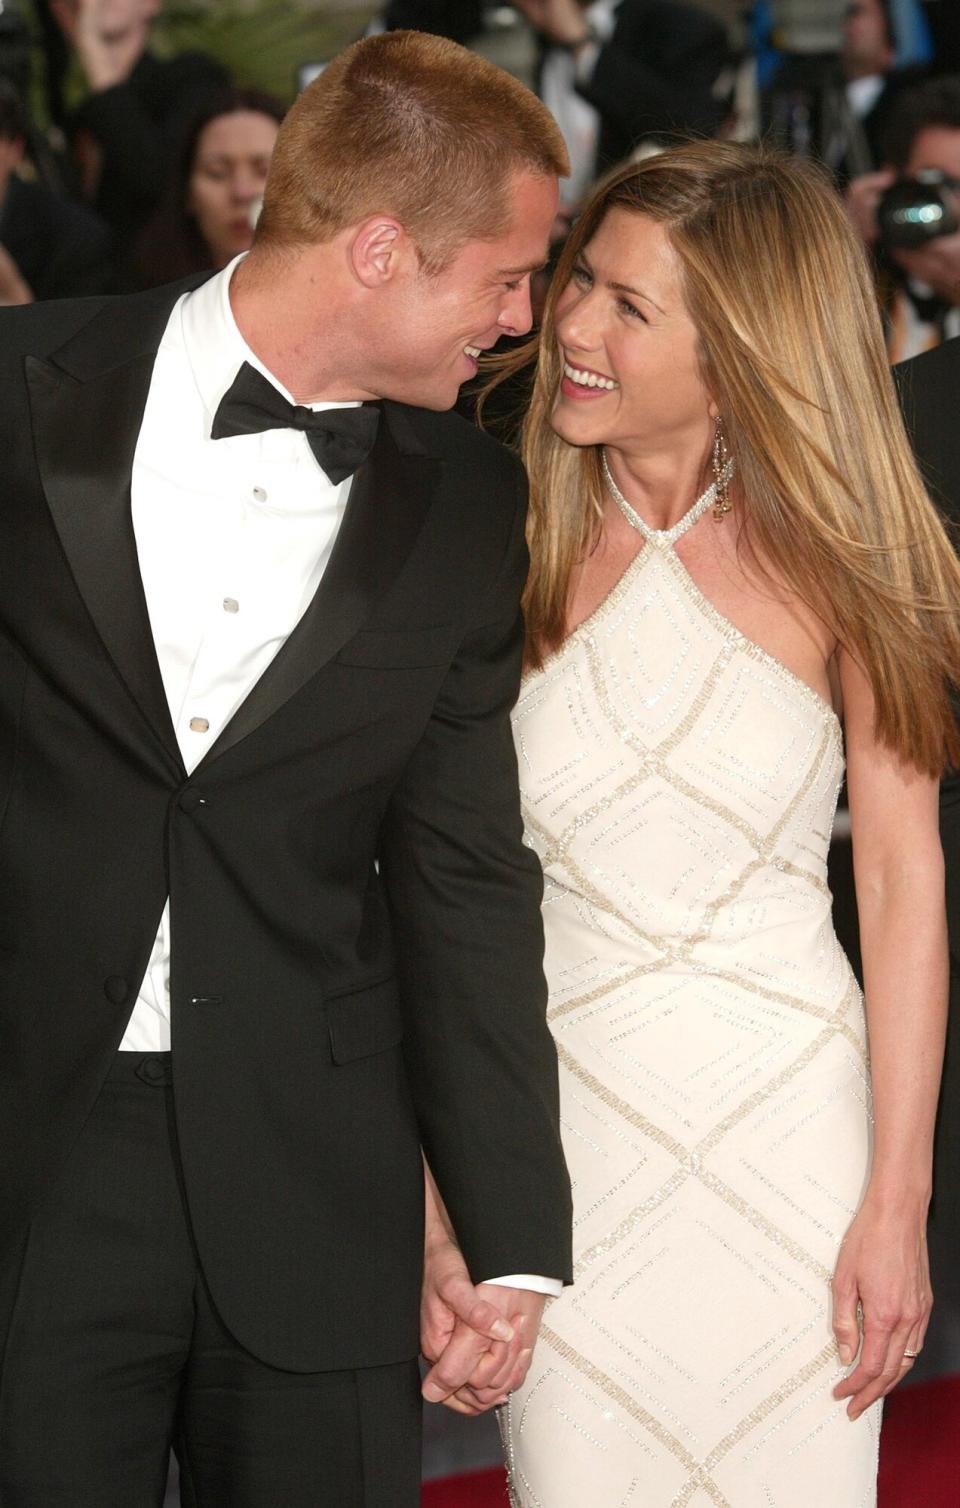 Brad Pitt and wife actress Jennifer Aniston attend the World Premiere of the epic movie &quot;Troy&quot; at Le Palais de Festival on May 13, 2004 in Cannes, France